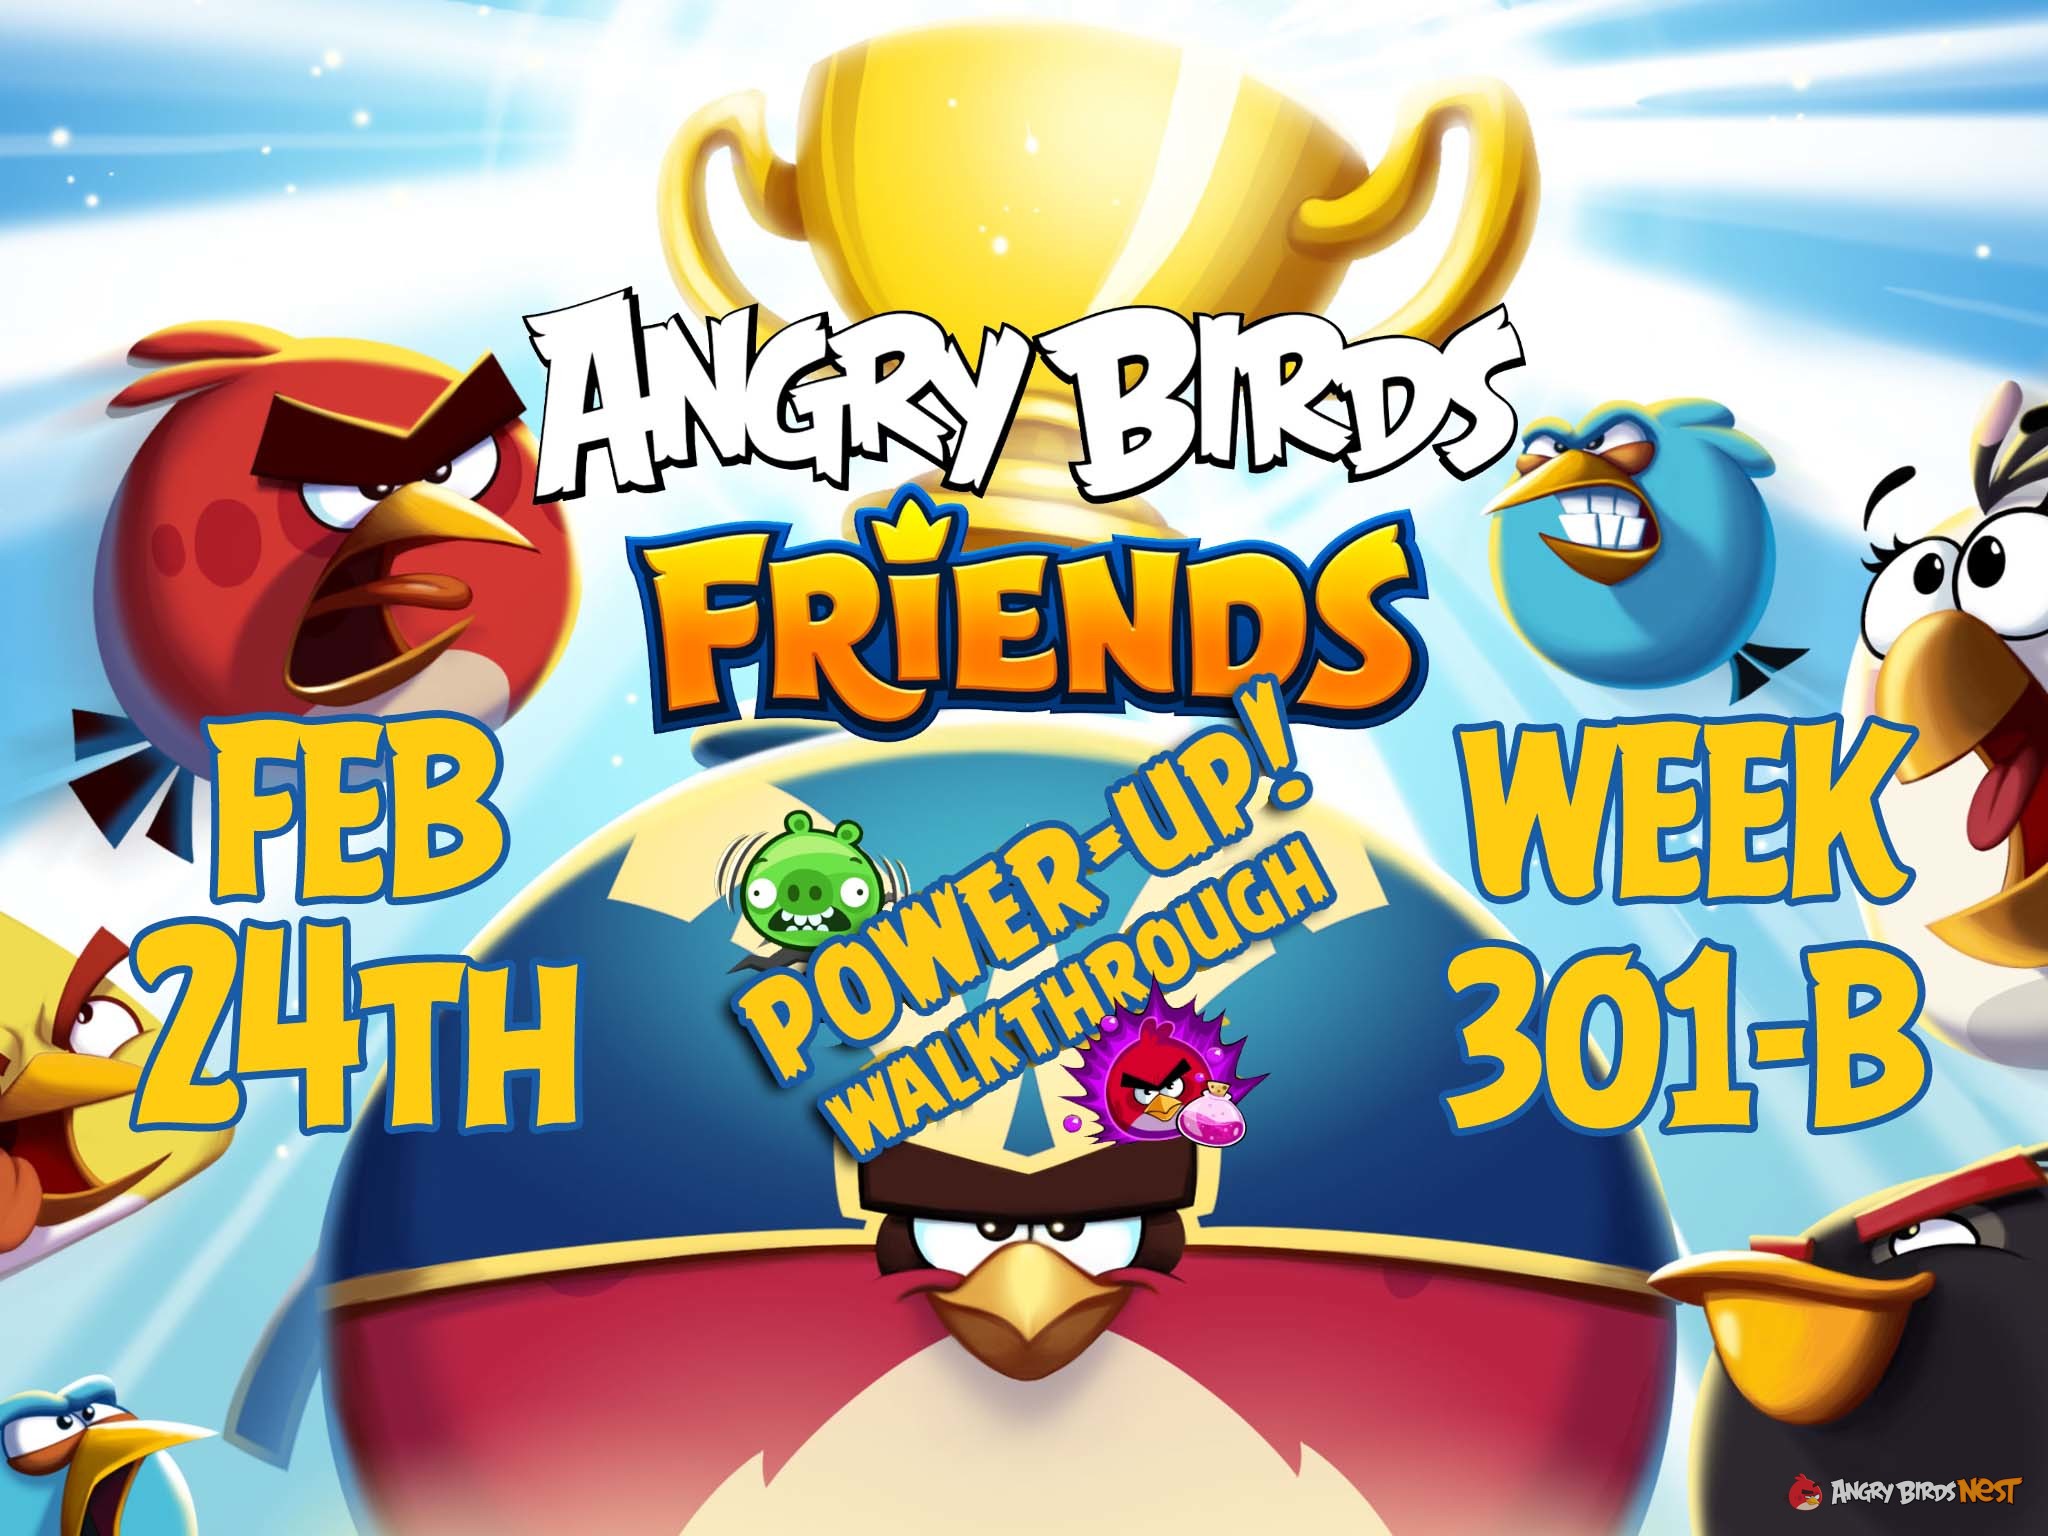 Angry Birds Friends Tournament Week 301-B Feature Image PU